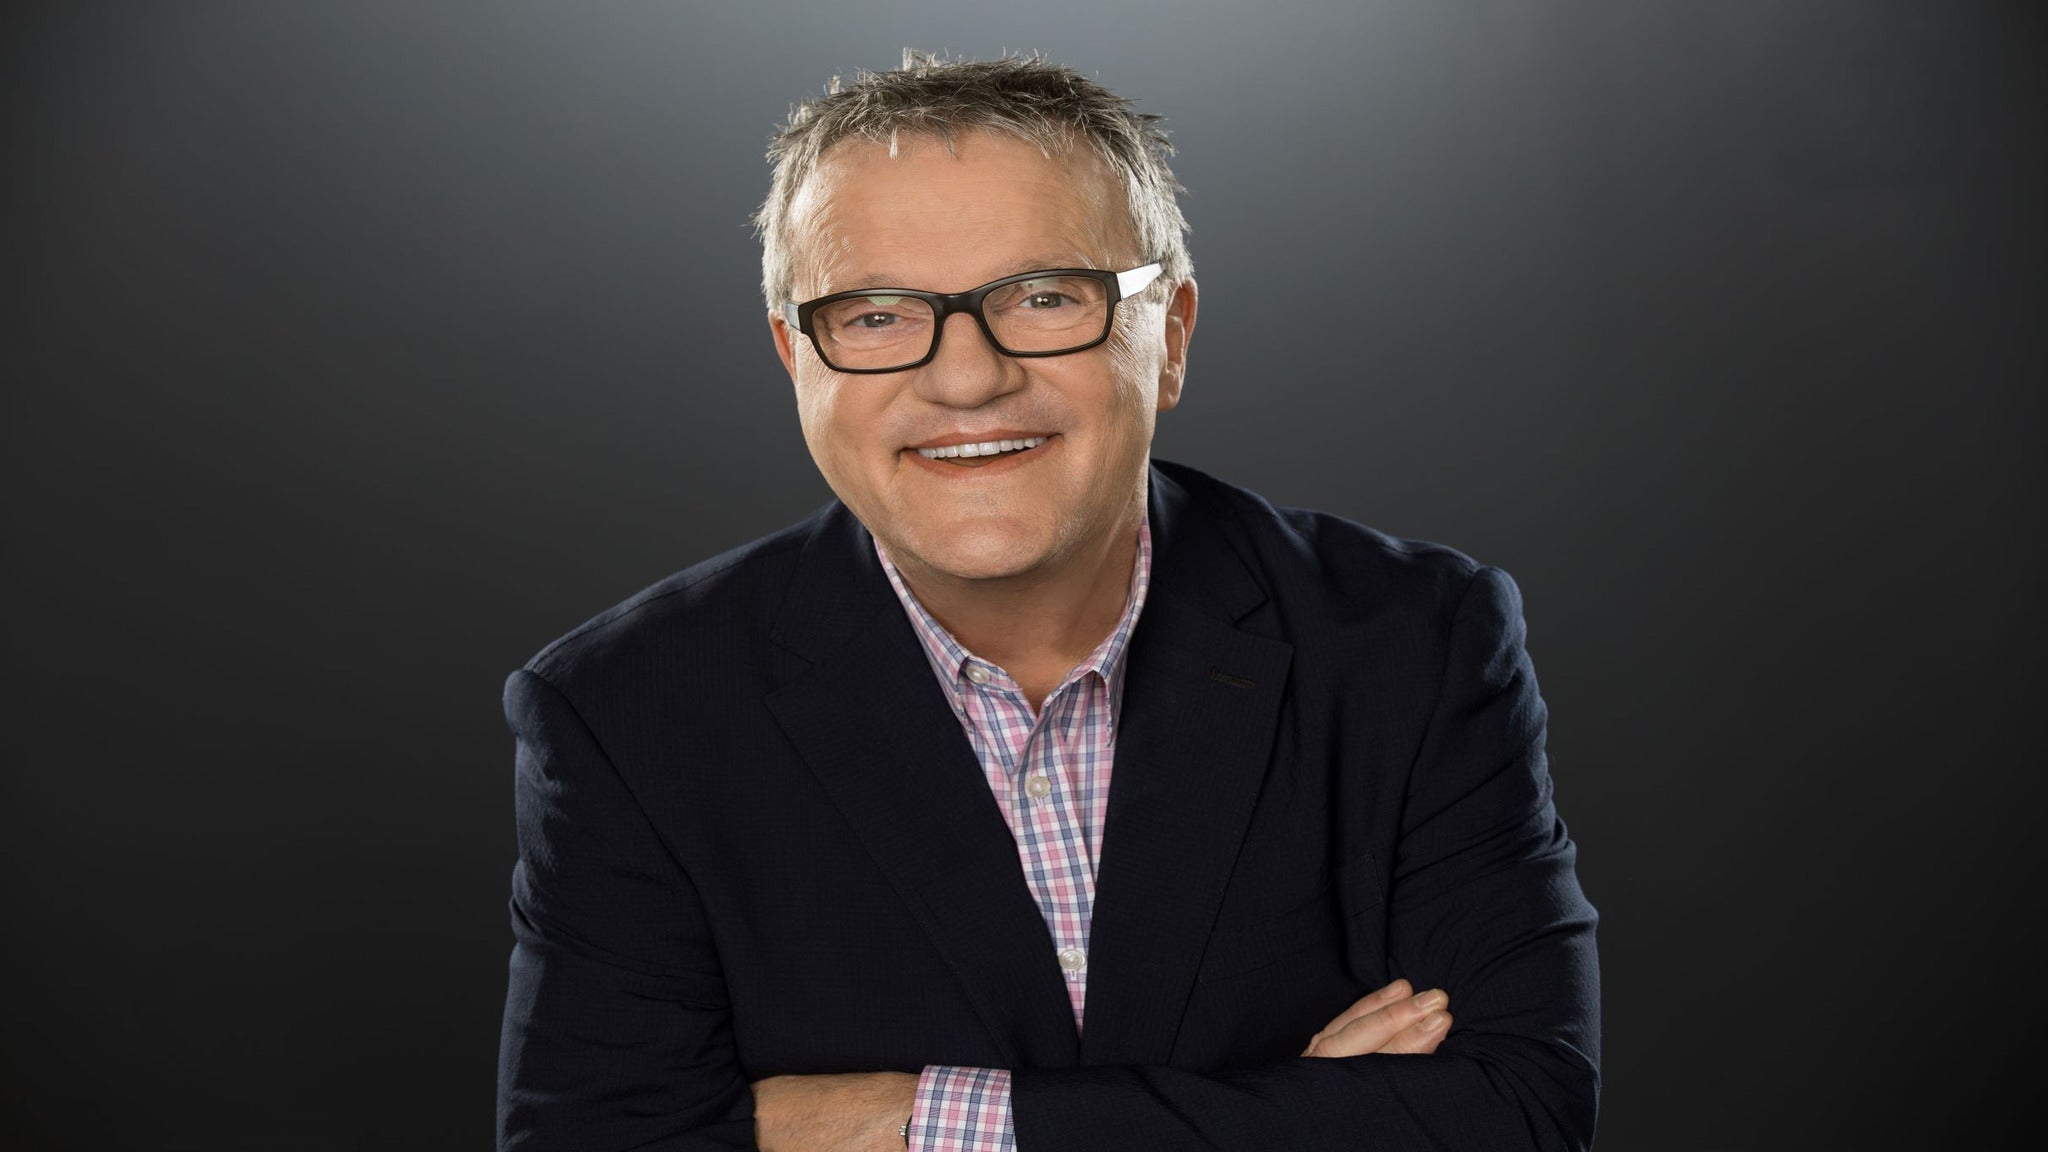 Image used with permission from Ticketmaster | Mark Lowry tickets